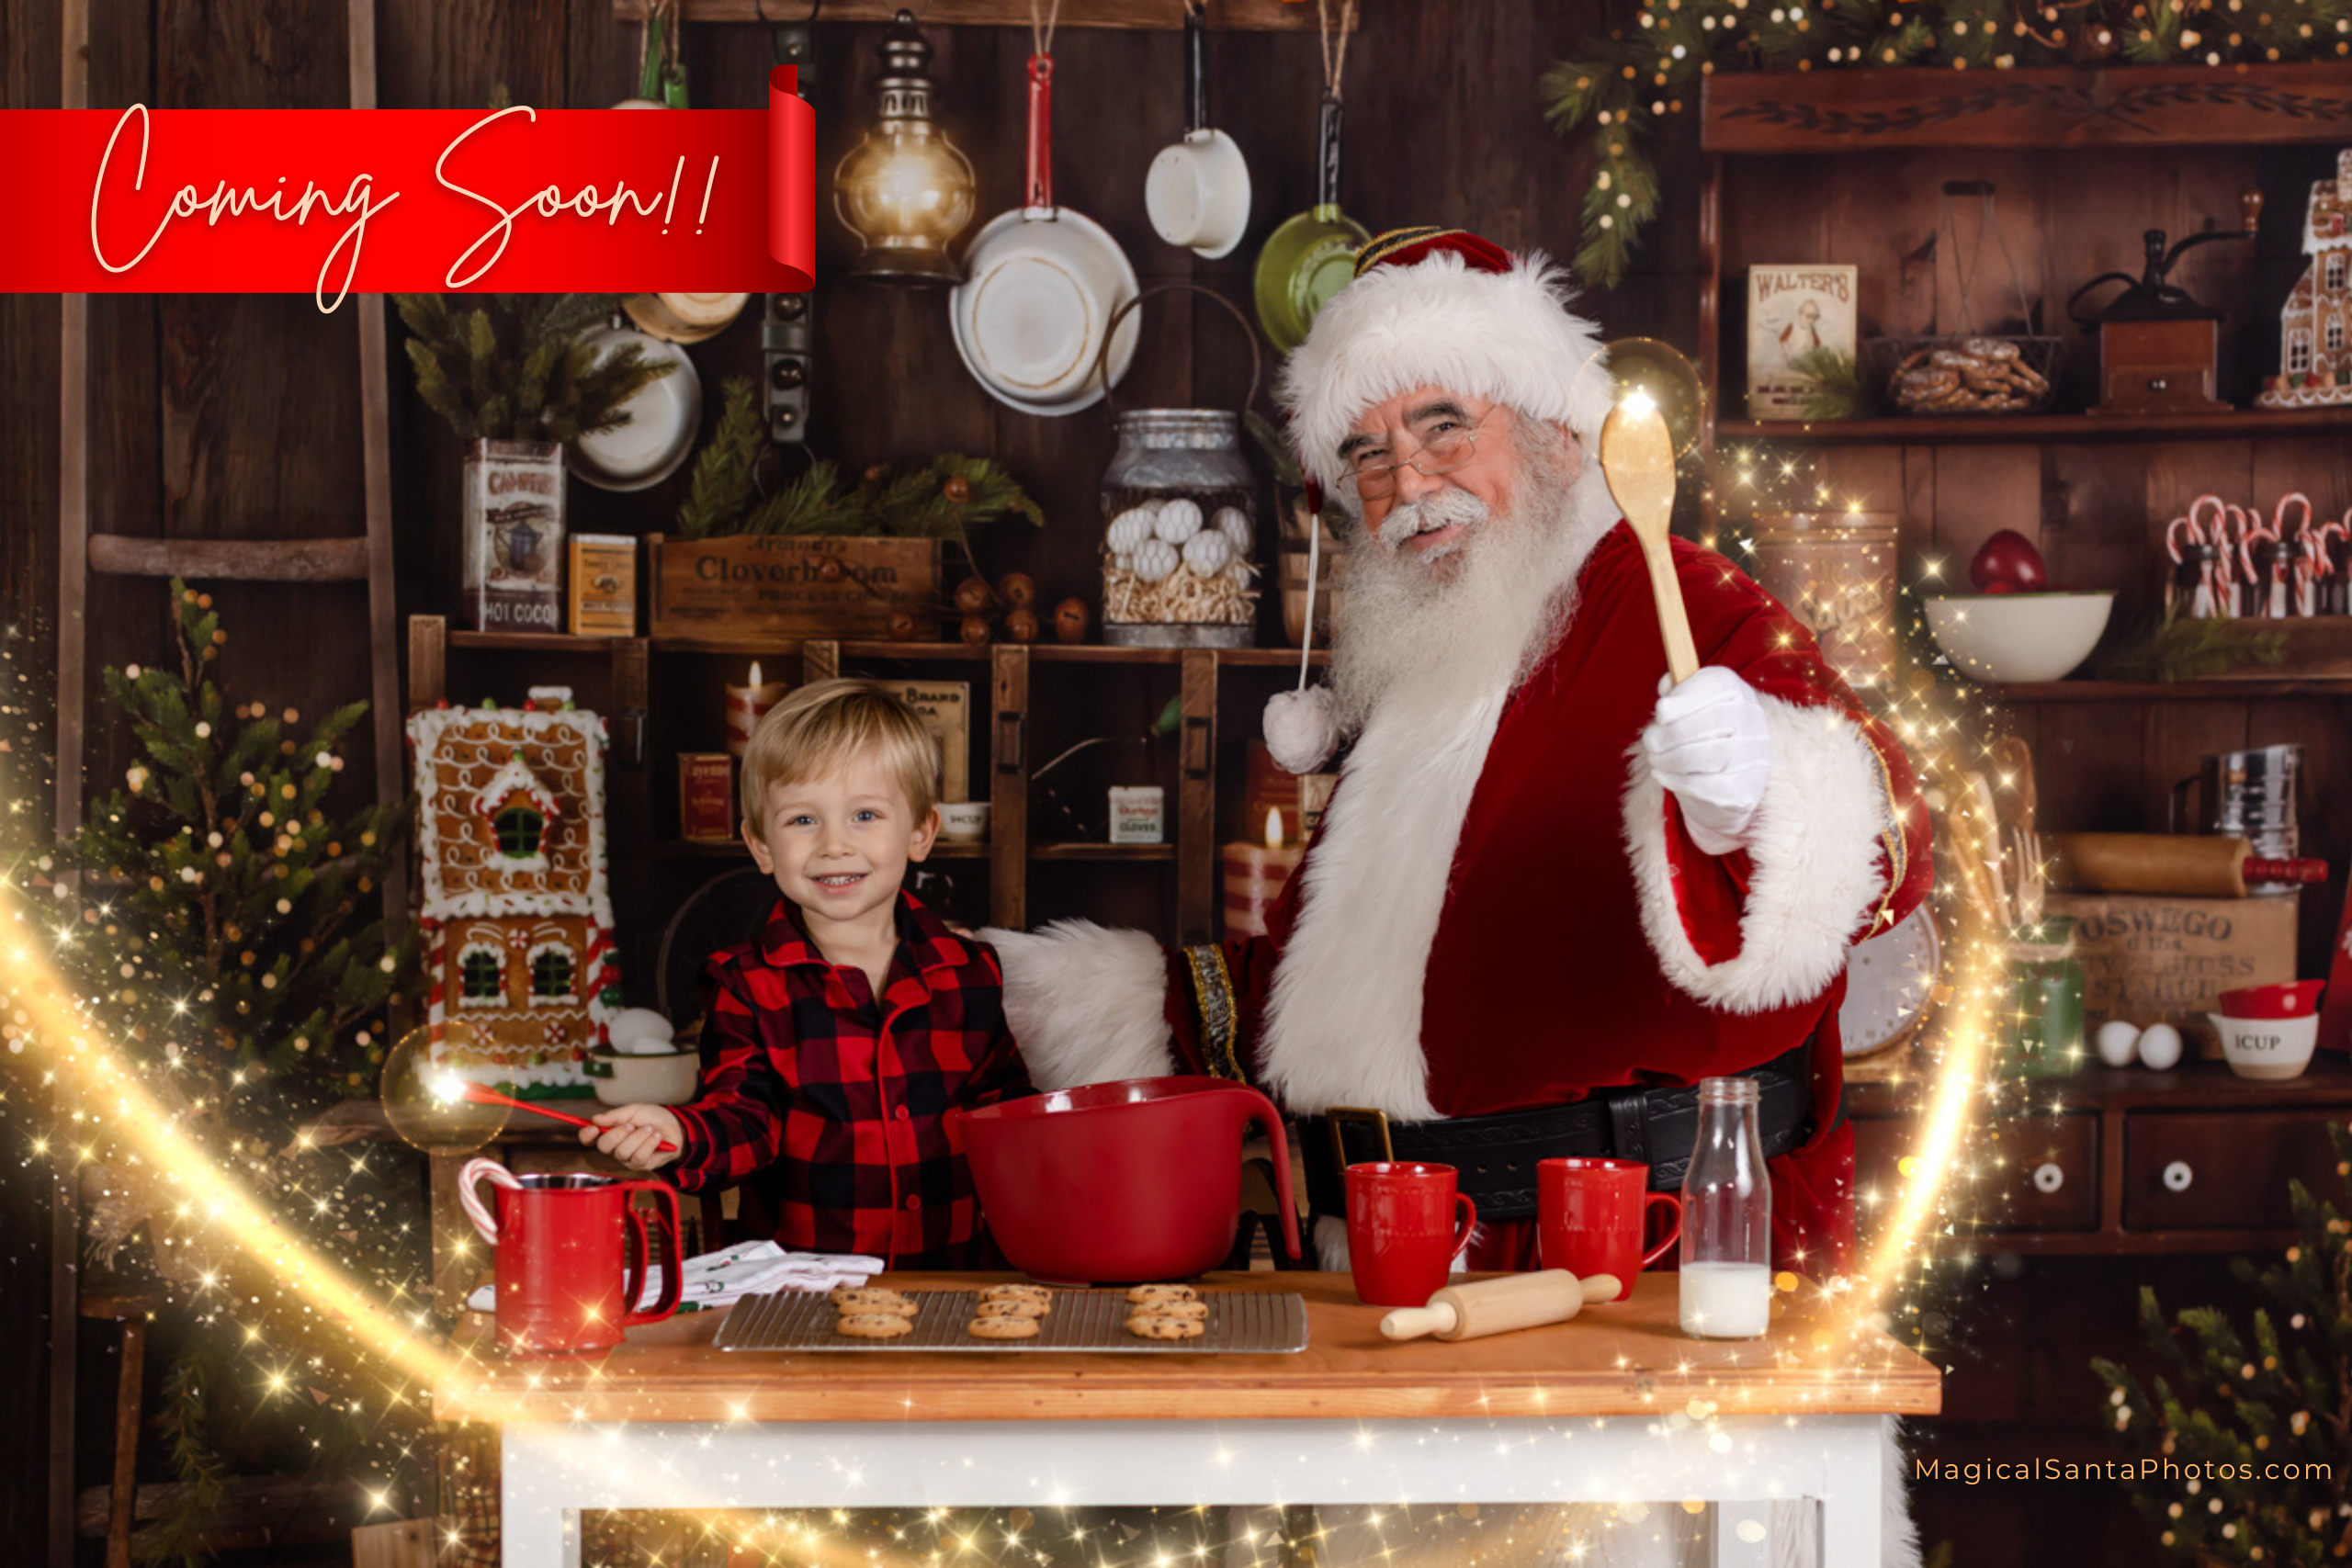 santa with a little boy cooking together with magic coming soon